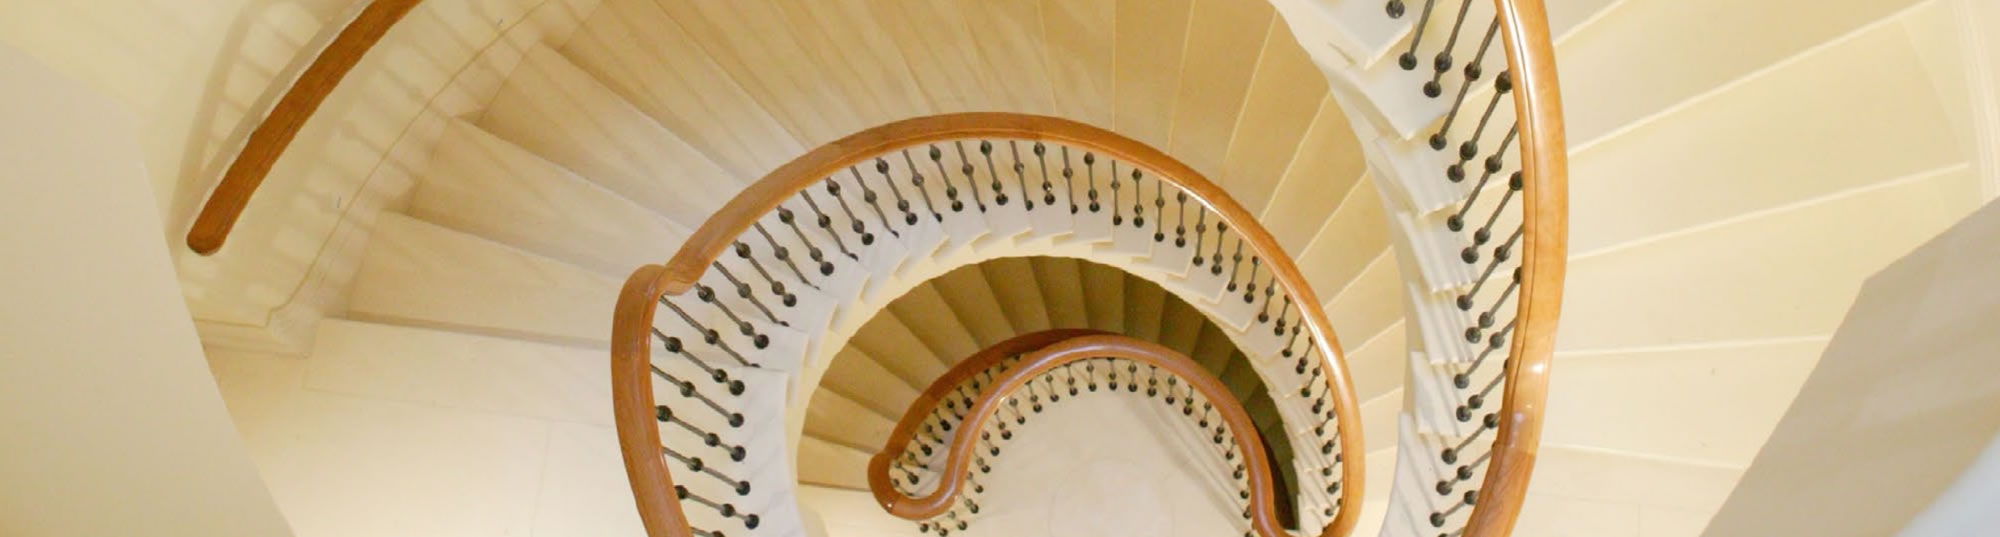 Handrails for Spiral Stairs